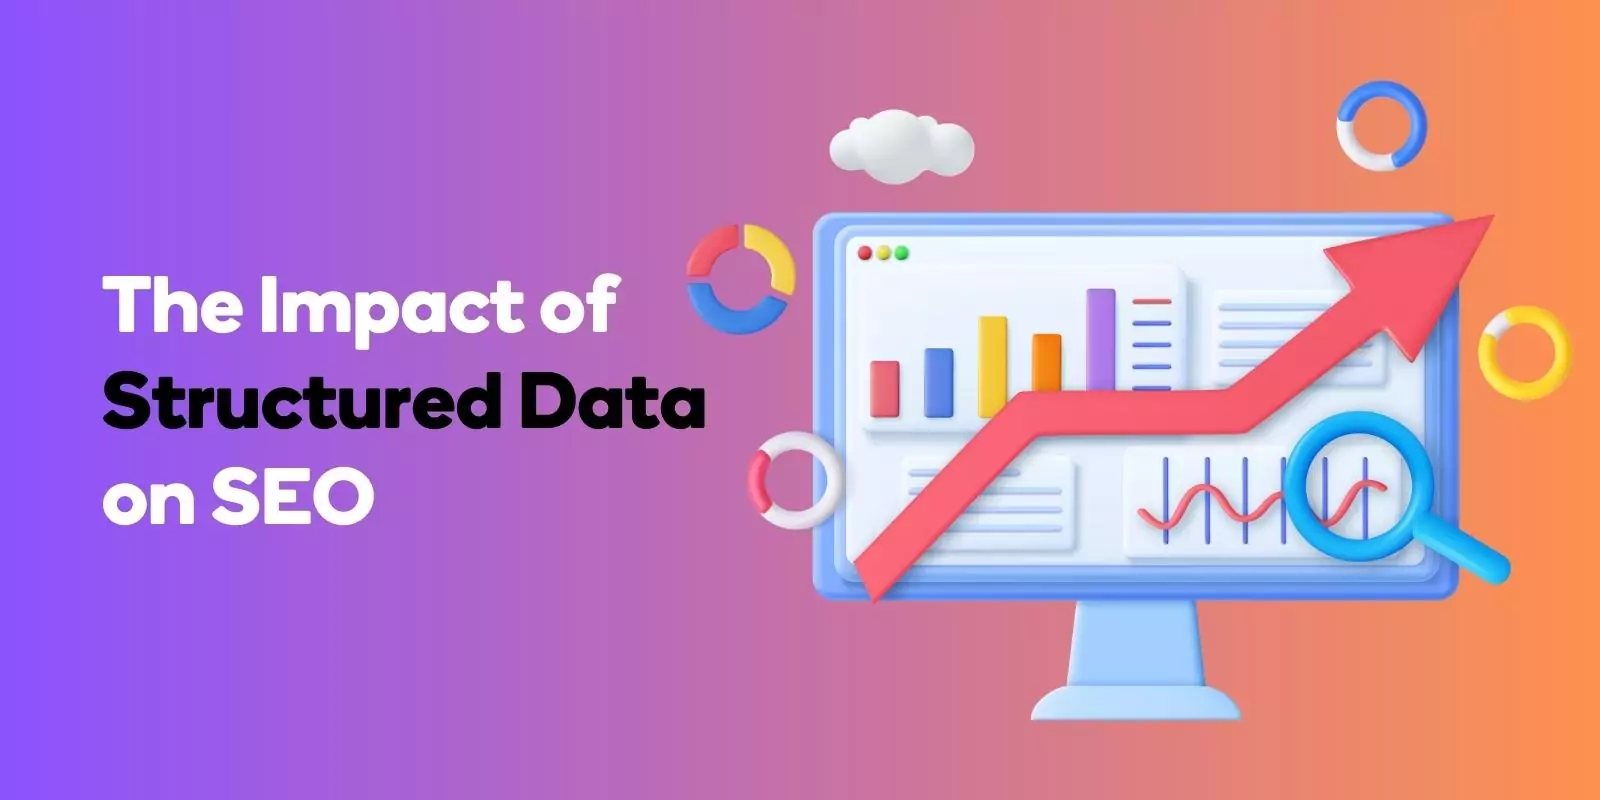 The Impact of Structured Data on SEO